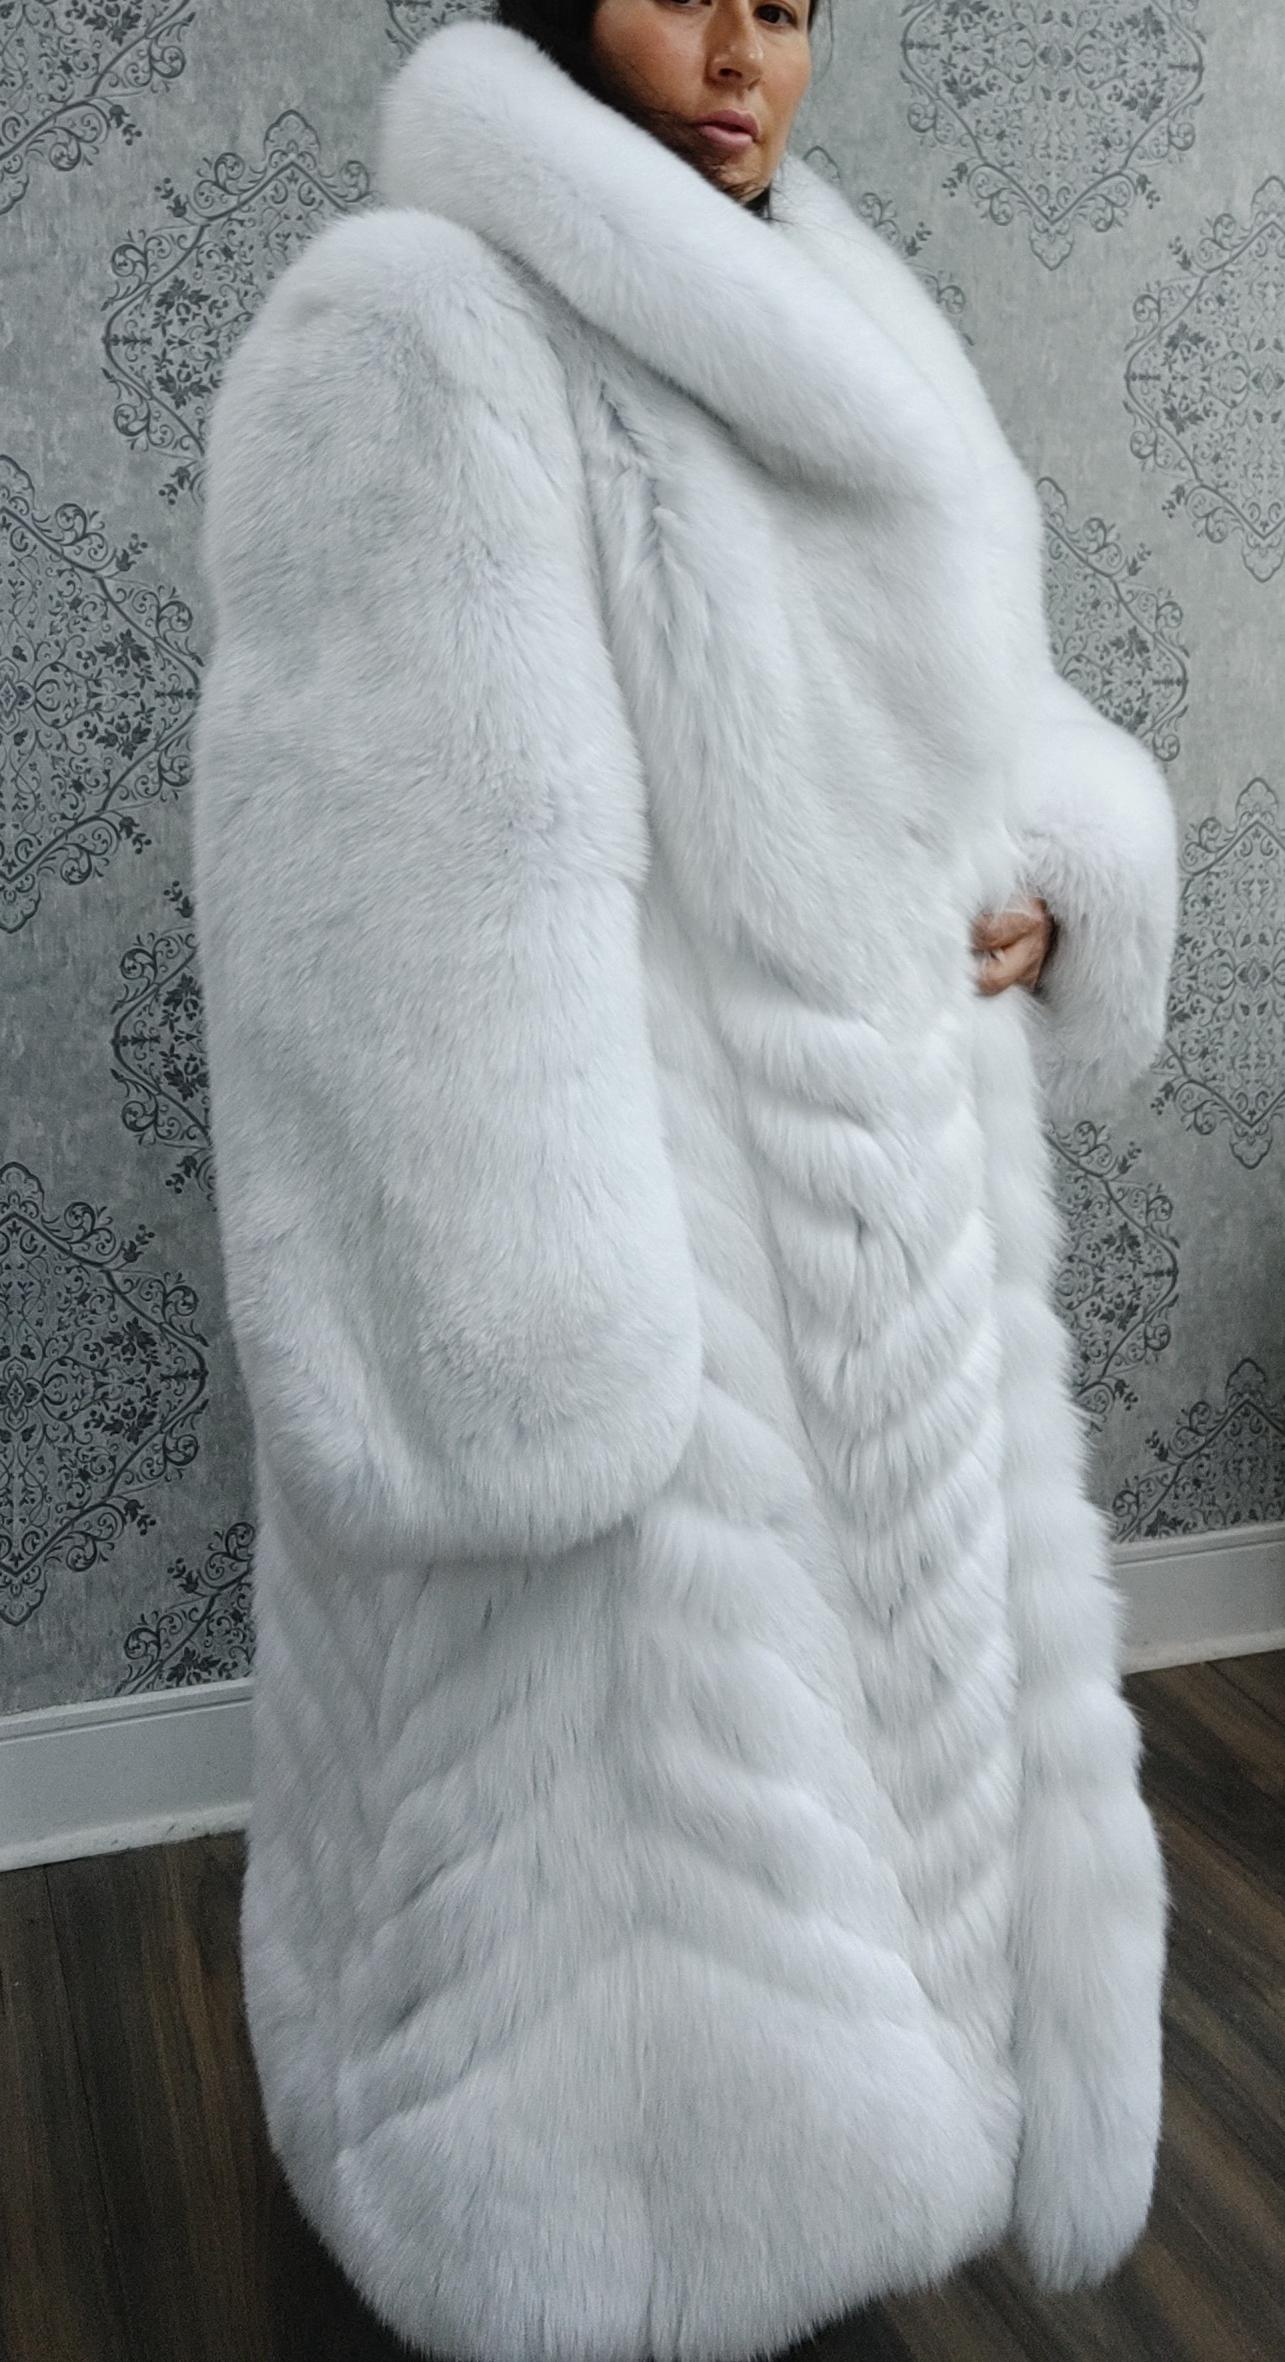 PRODUCT DESCRIPTION:

Brand new luxurious Fox fur coat 

Condition: Brand New

Closure: German hook

Color: White

Material:  Fox

Garment type: Coat

Sleeves: Straight

Pockets: slit pockets

Collar: Portrait

Lining: Shirred Silk satin

Made in